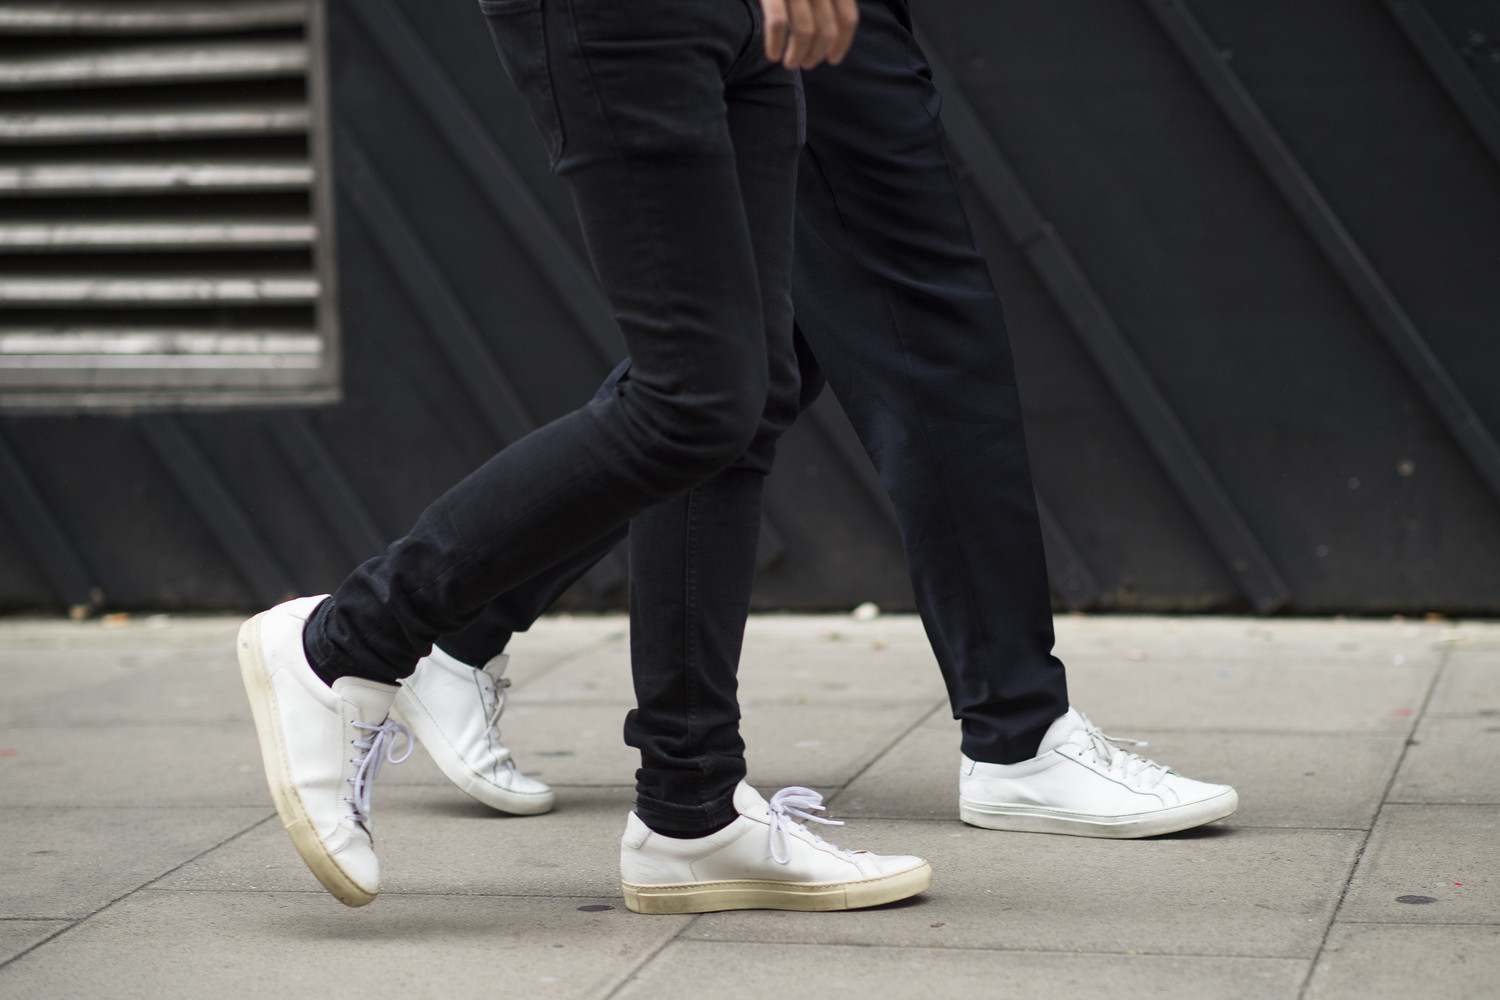 Lyst's Definitive Guide To Sneaker Sizing